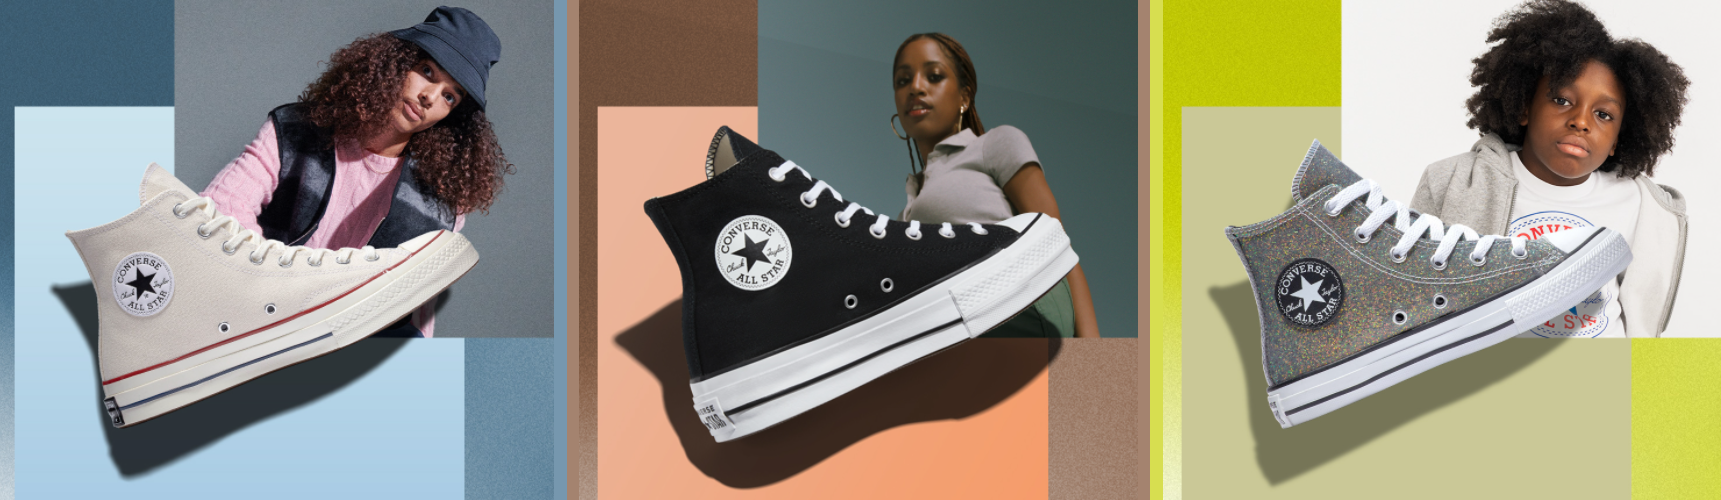 Converse Cyber sale extra 40% OFF on sale items with promo code. Save on best sellers